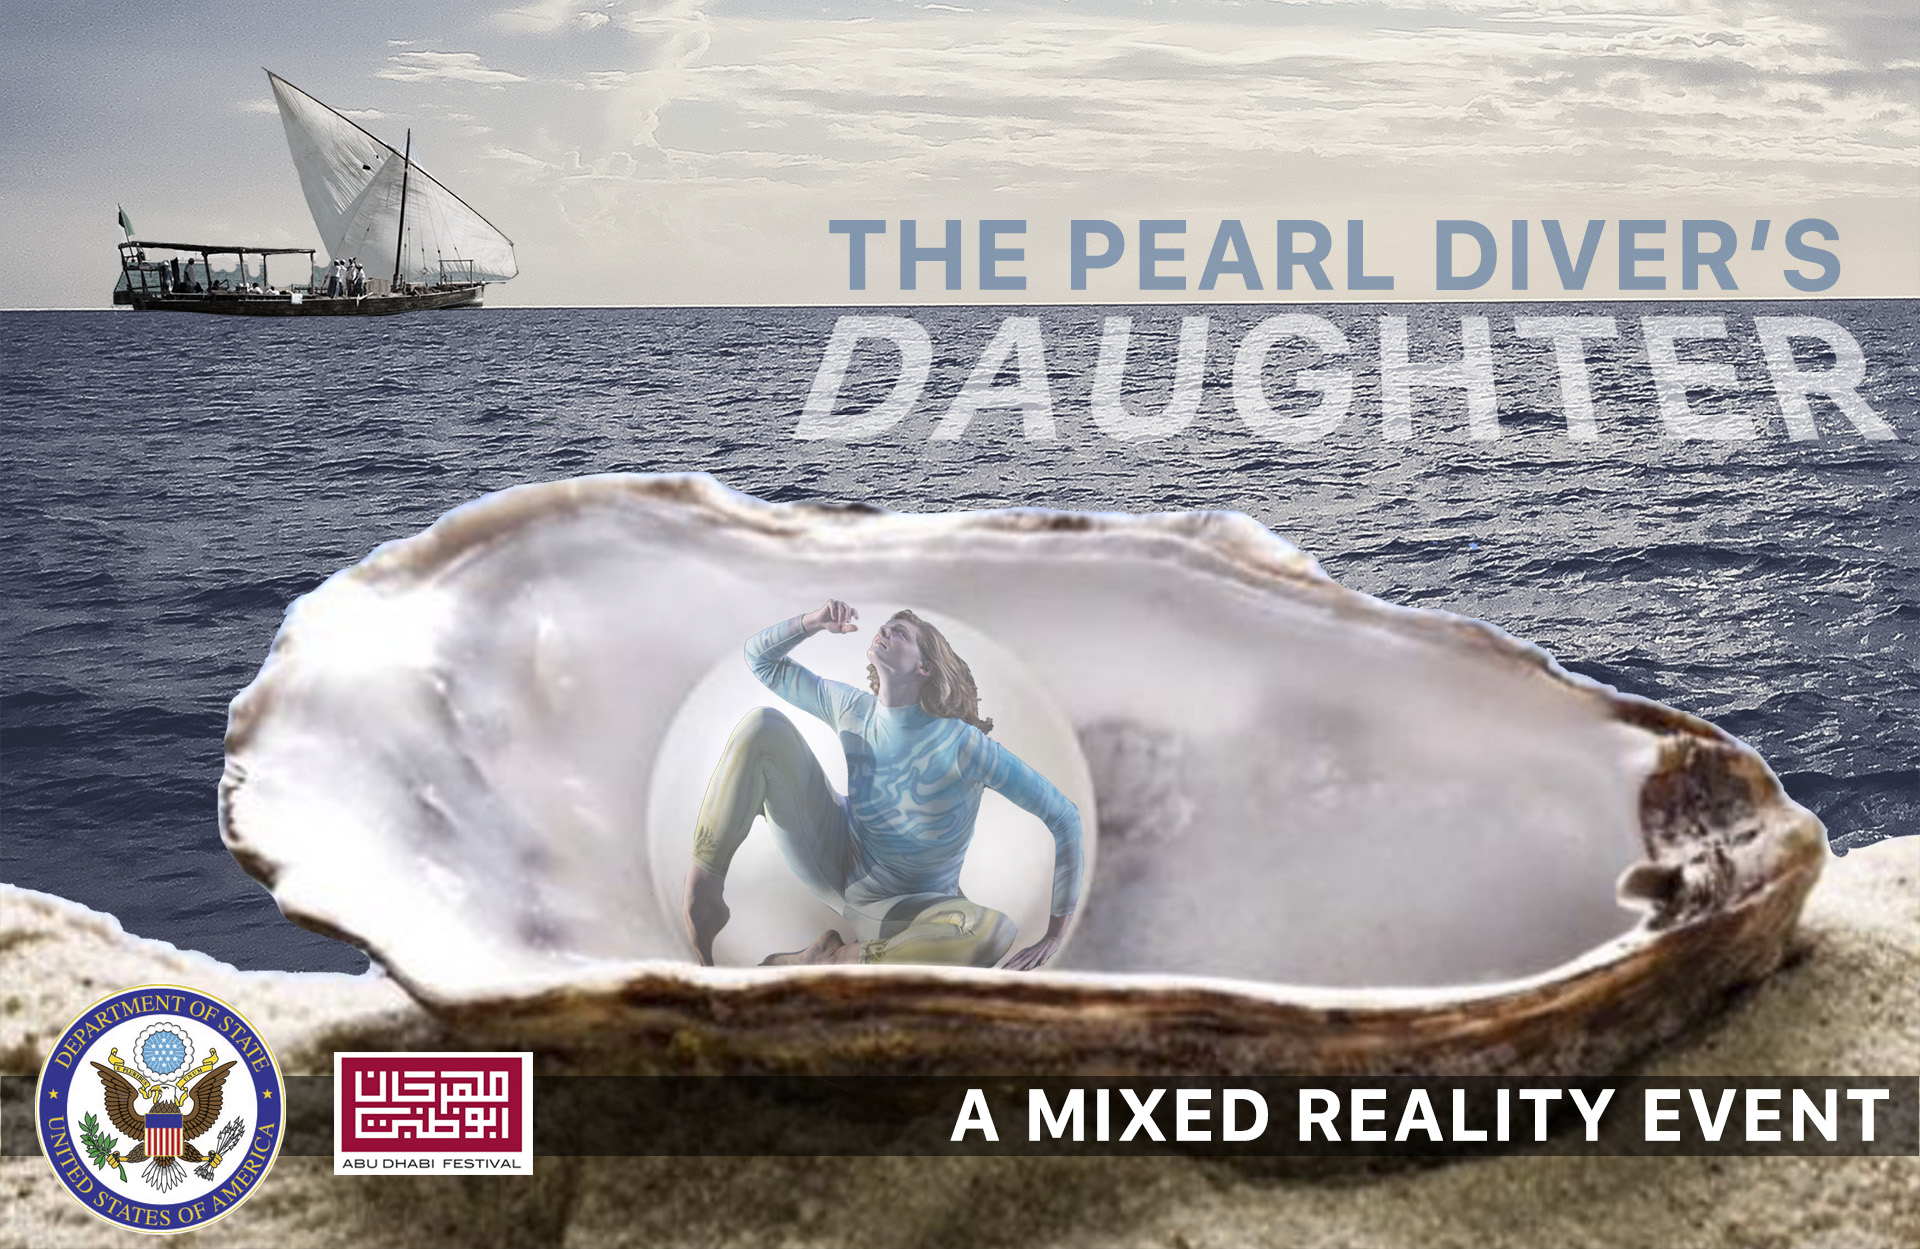 The Pearl Diver's Daughter